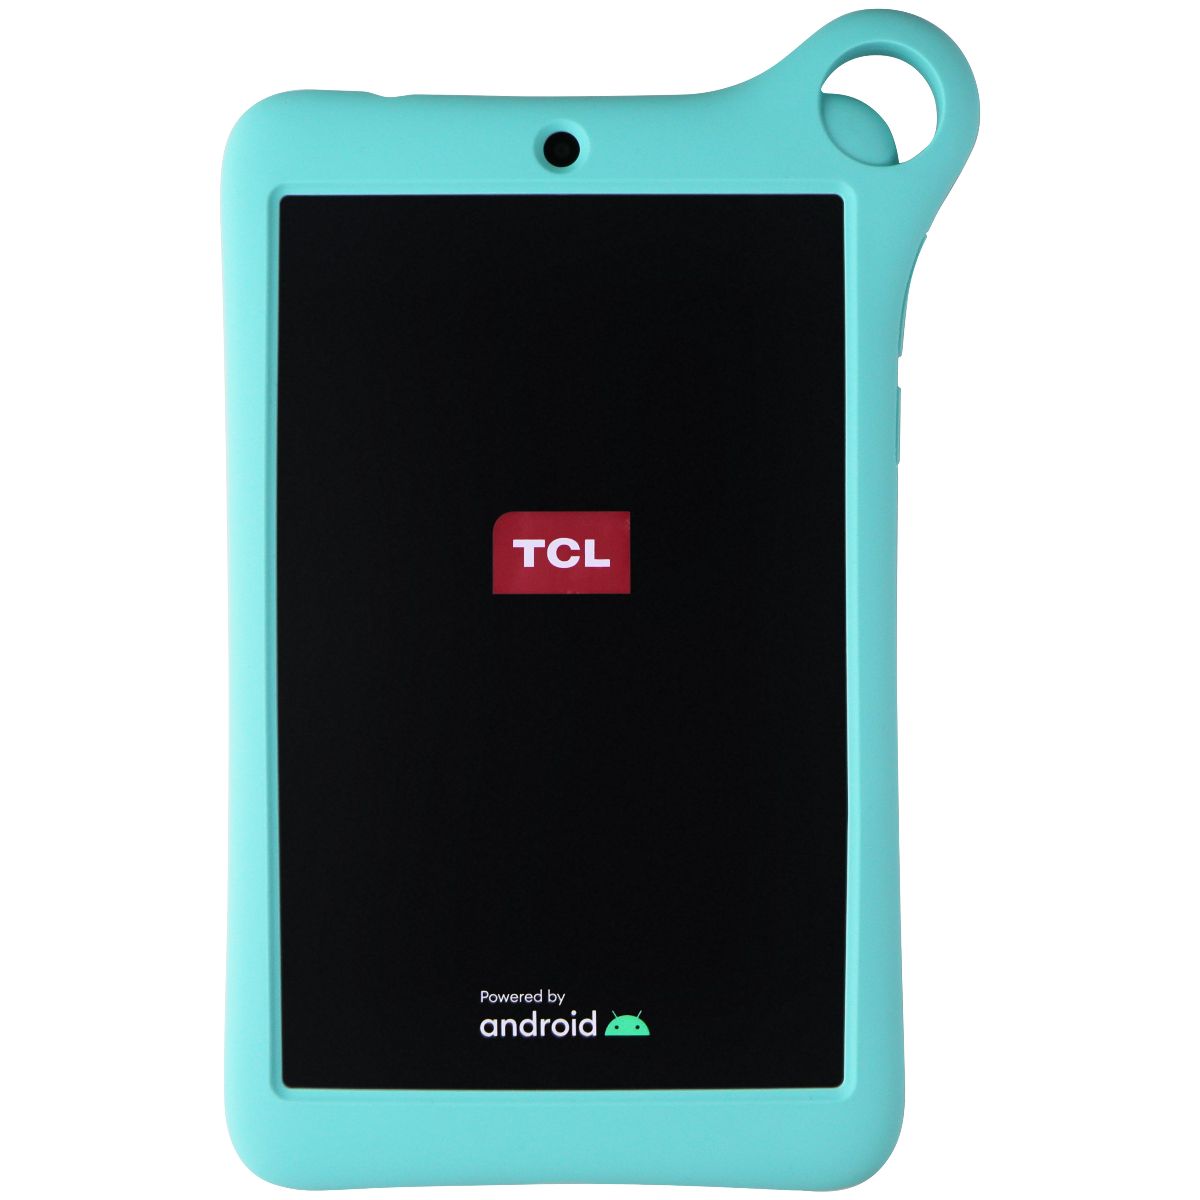 TCL TAB (8.0-in) Family Edition (TCL-9049L) Verizon Only - Black/Teal Case/32GB